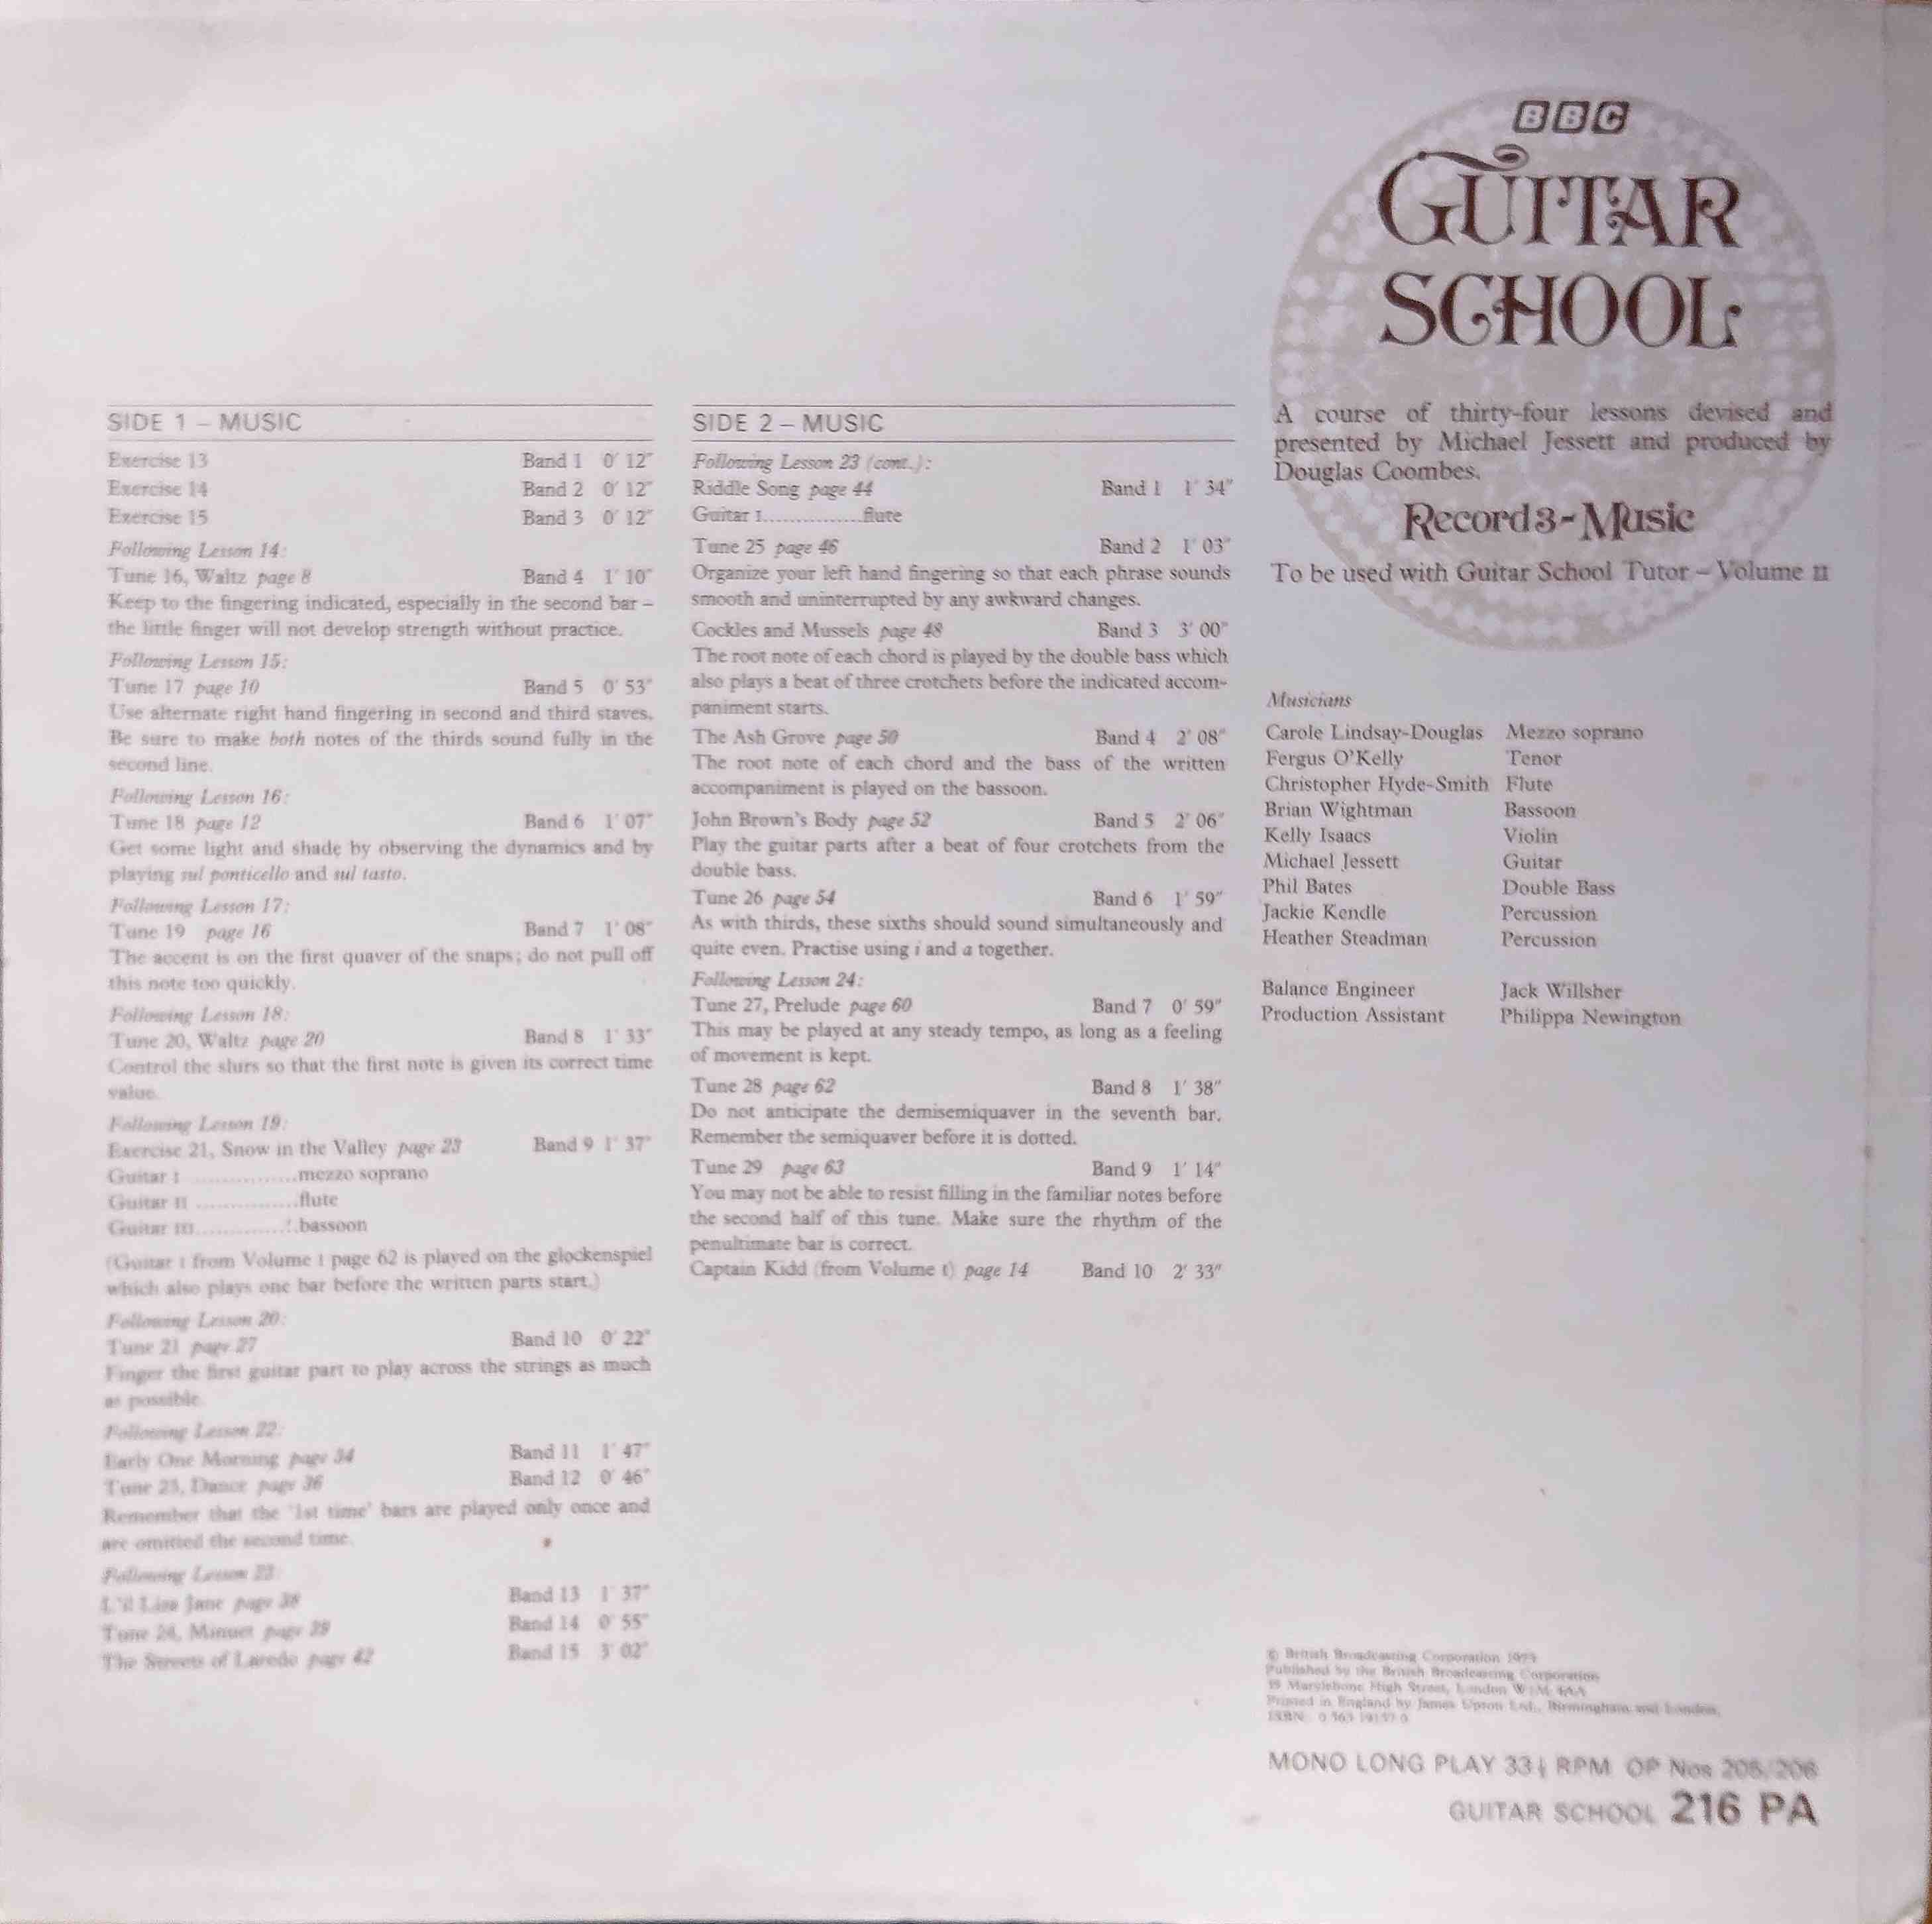 Picture of OP 205/206 Guitar school - Record 3 - Music by artist Michael Jessett from the BBC records and Tapes library